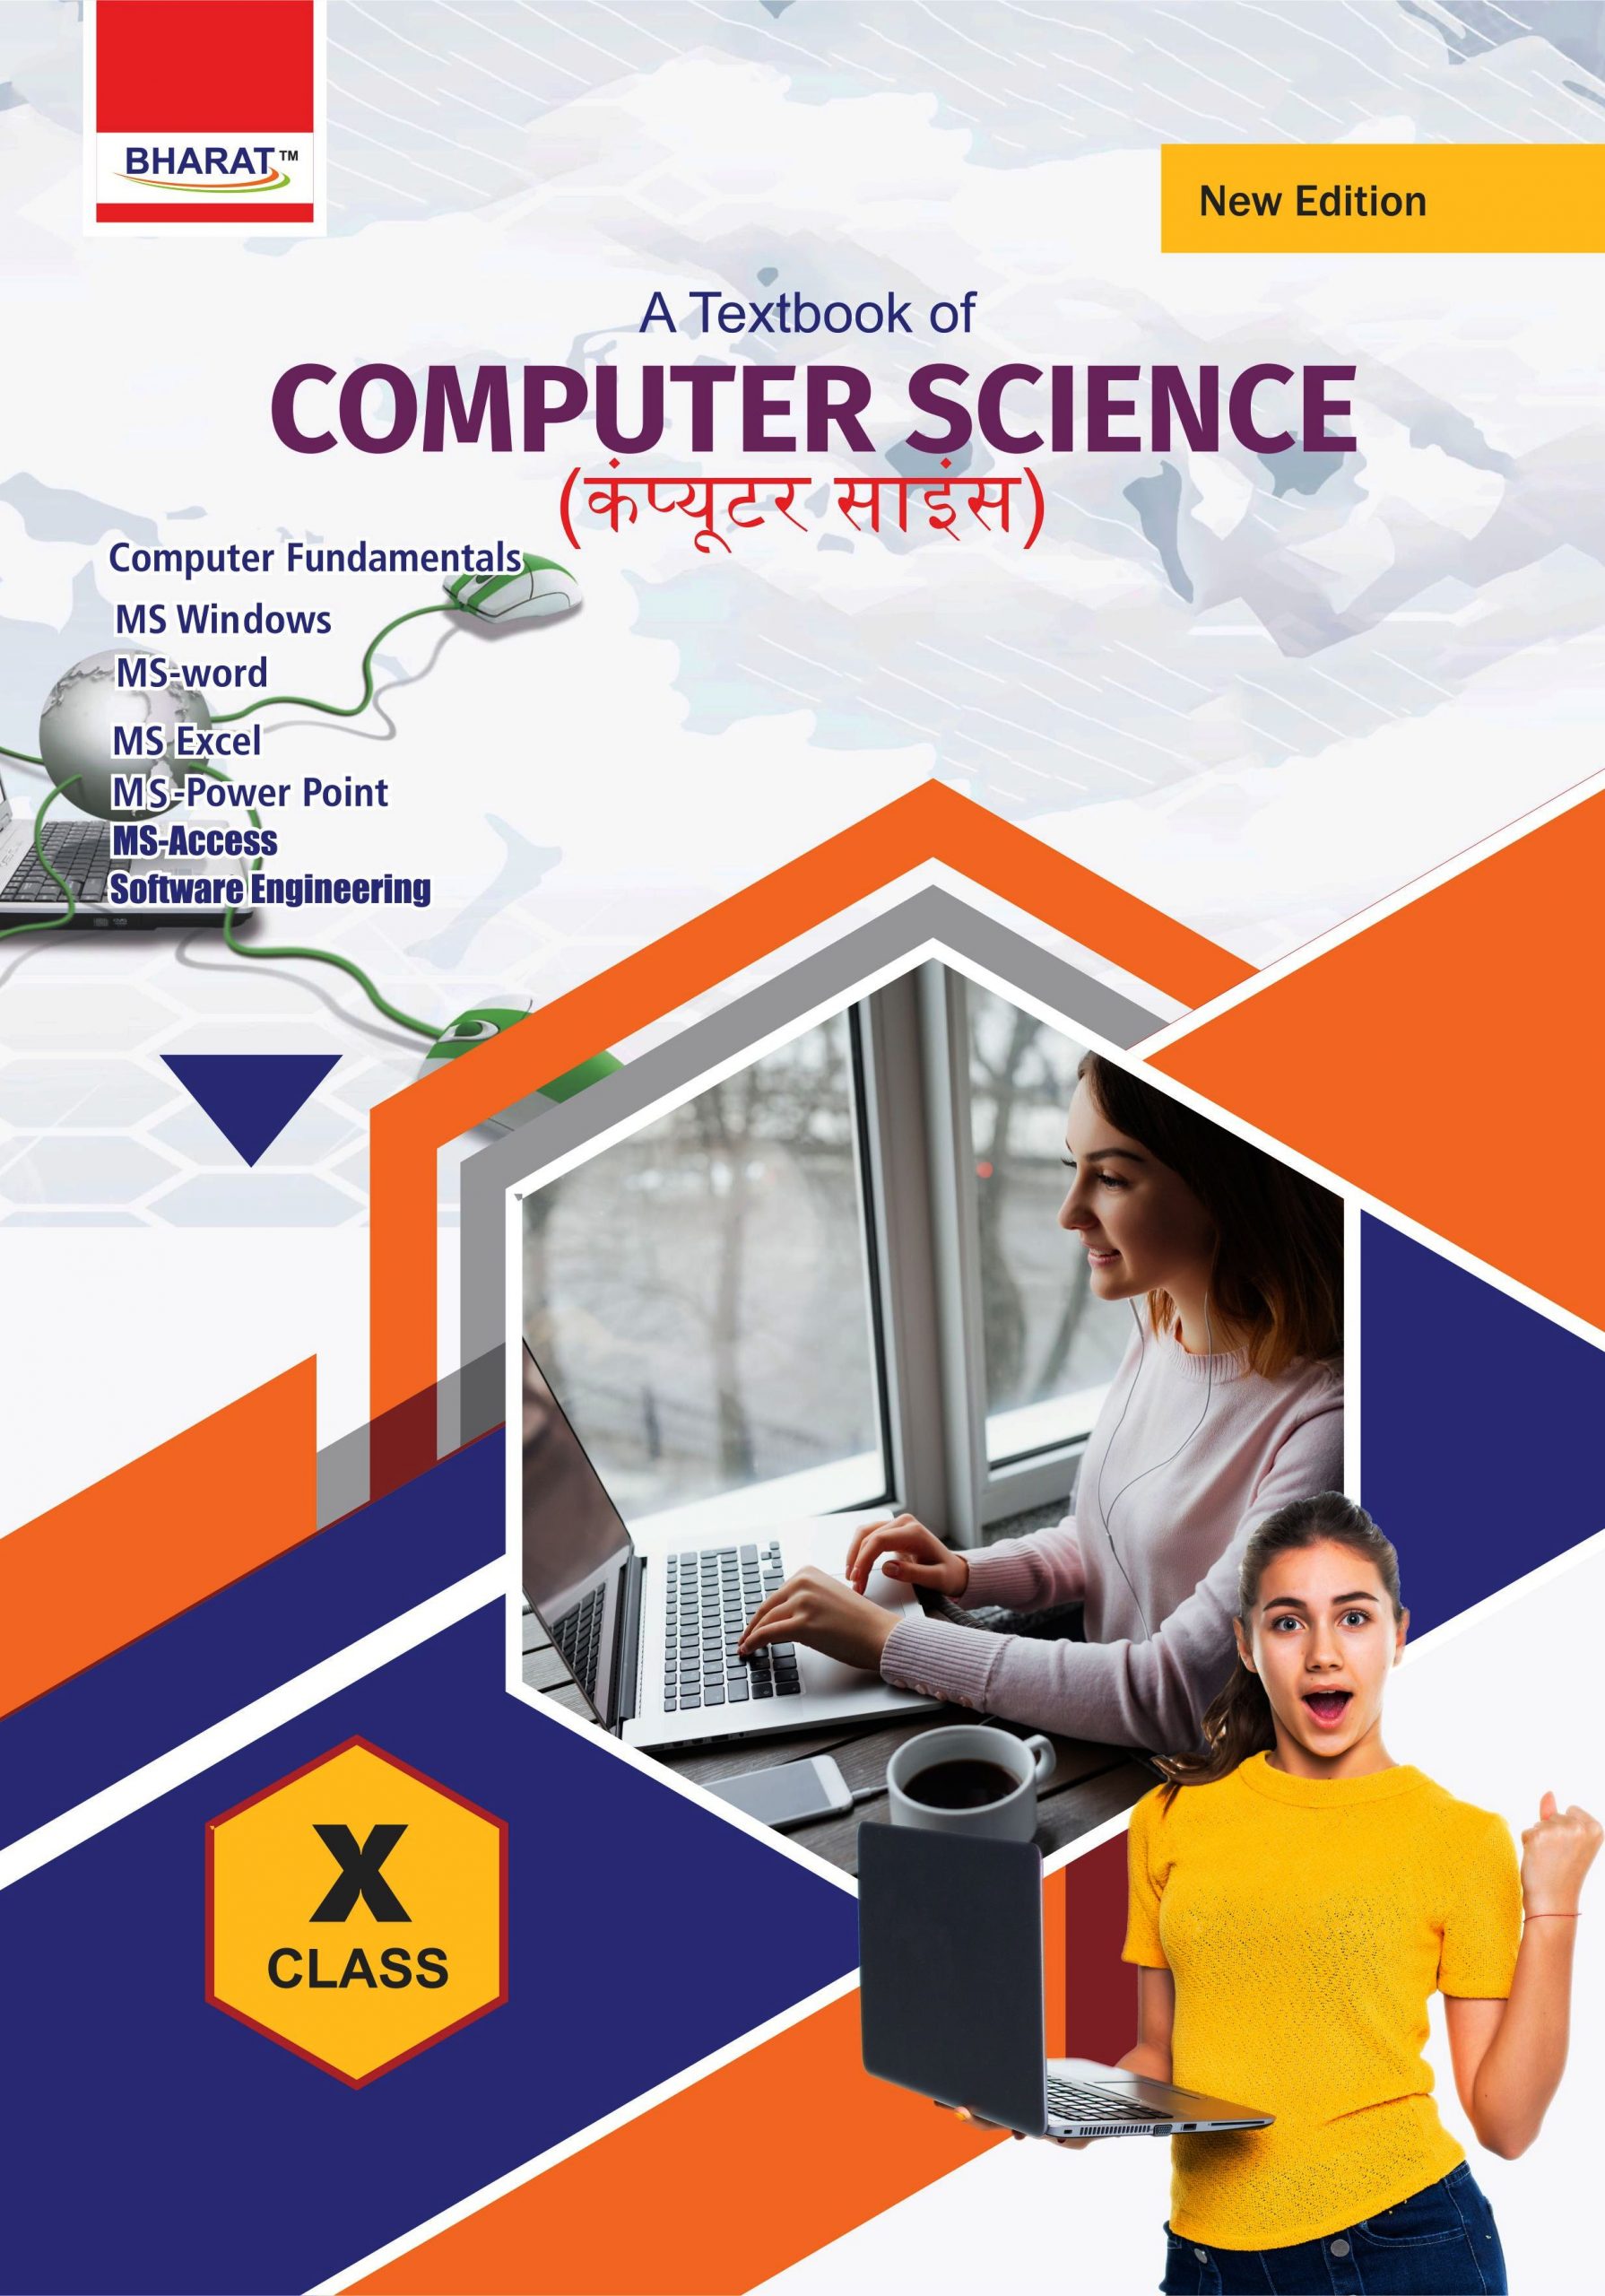 Textbook of Computer Science (HBSE)–Class X (Bilingual)